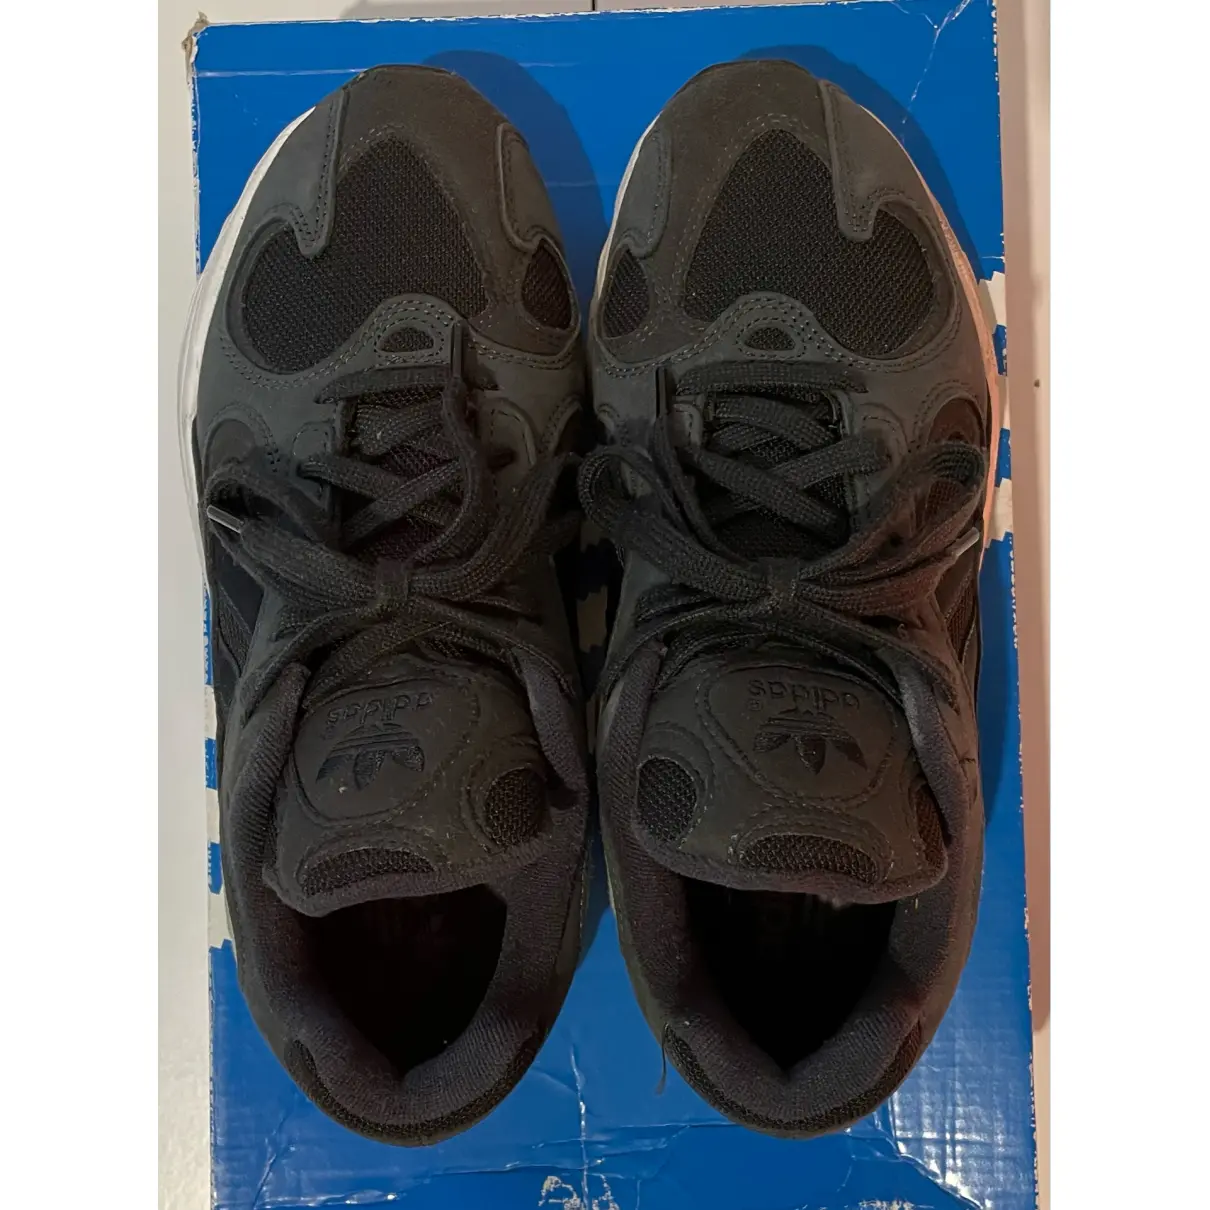 Buy Adidas Yung-1 leather trainers online